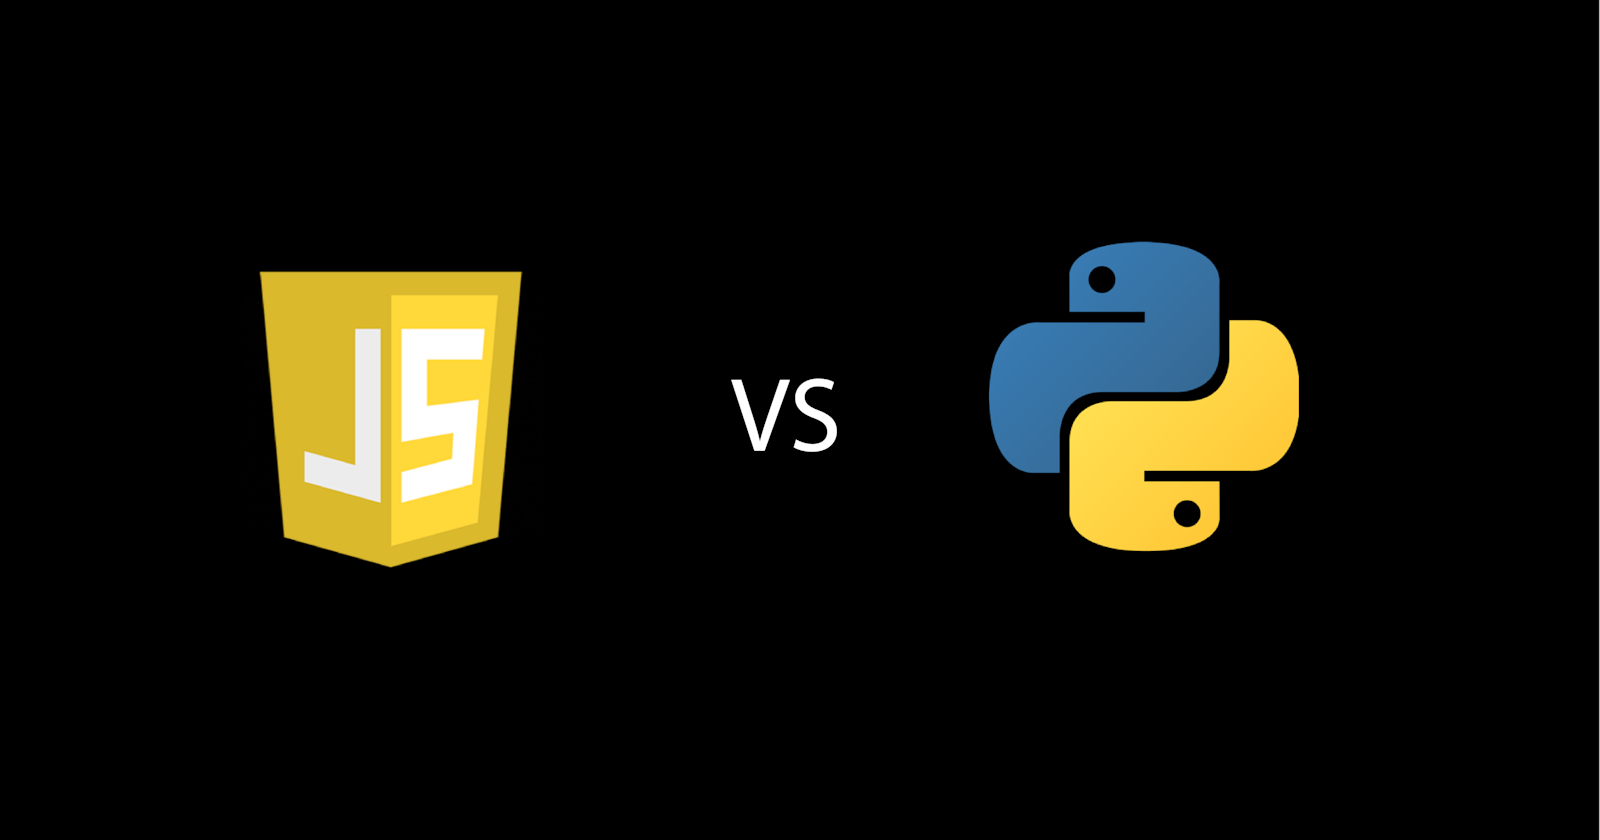 First language you need to learn (JavaScript vs Python)